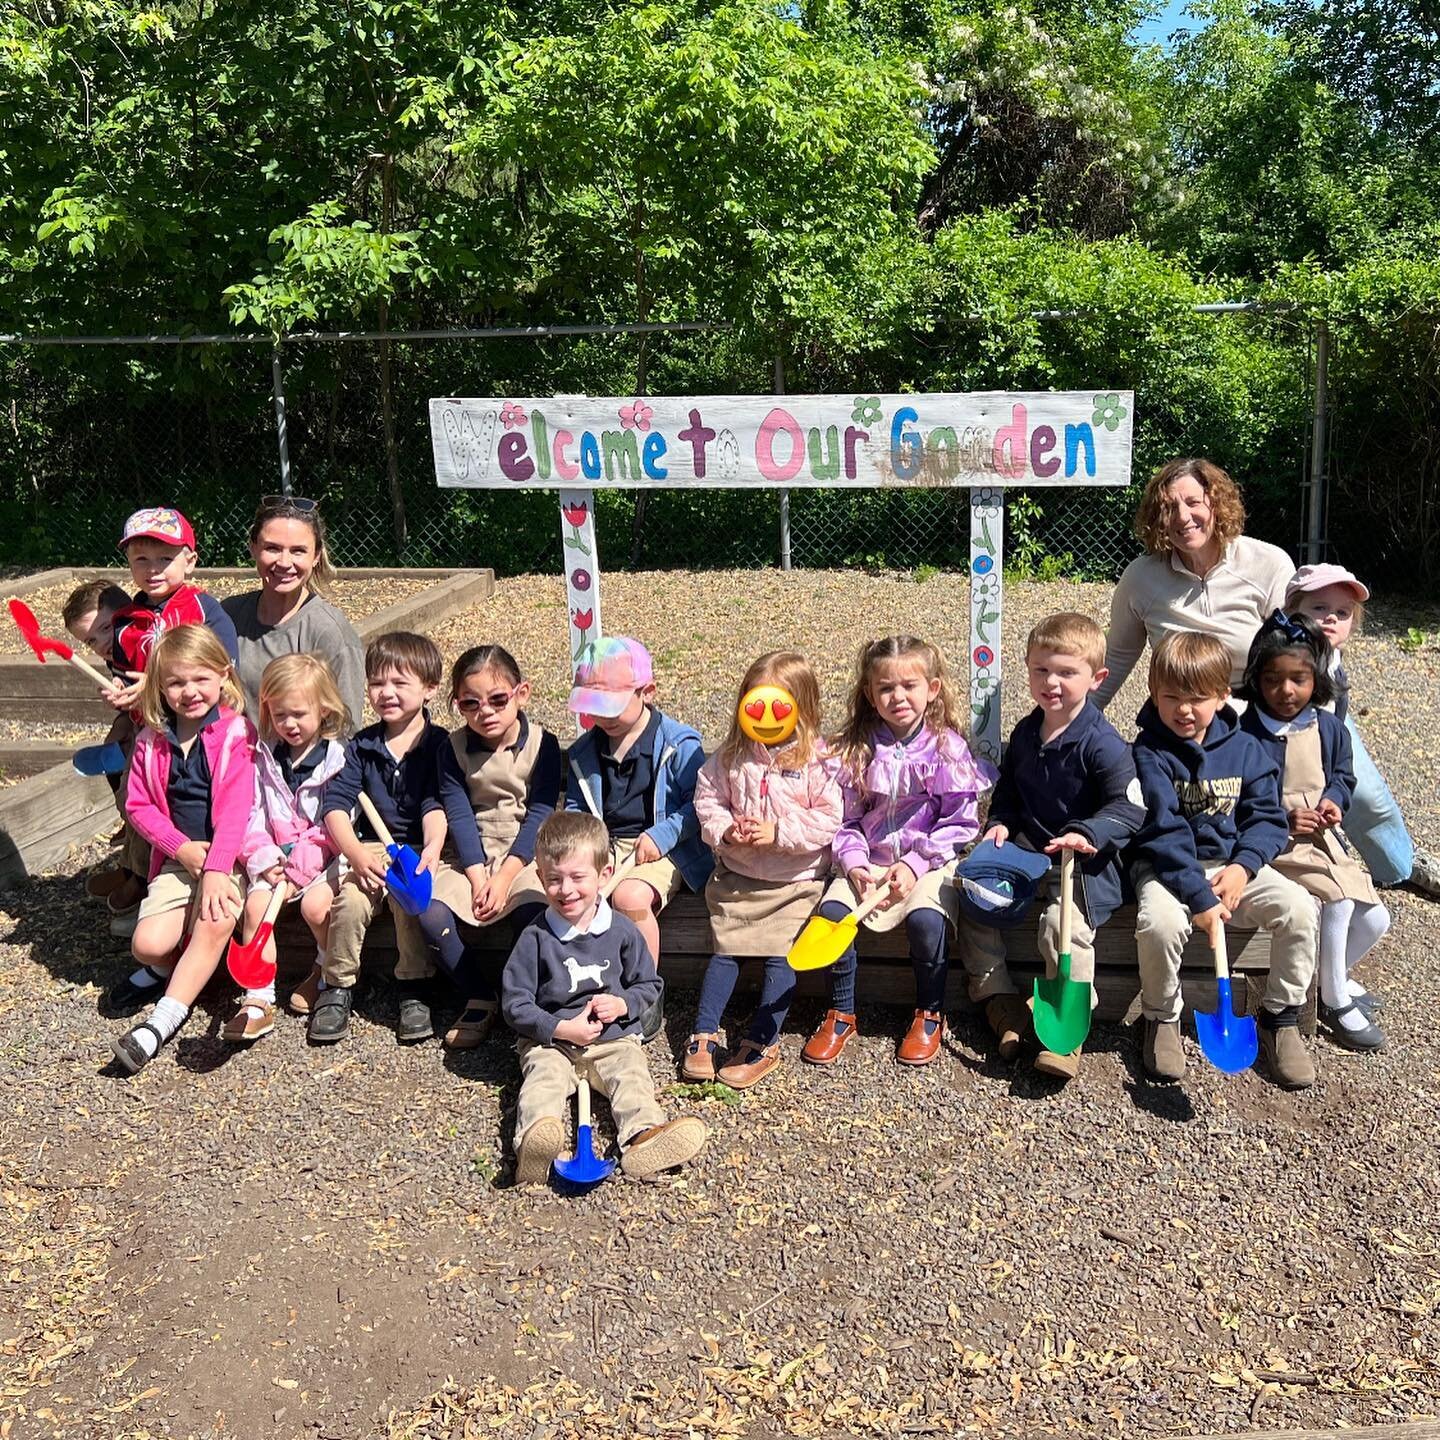 Welcome to Our Garden 🌸 Our PreK-3 and Early Kindergarten classes learned about pollinators and planted flowers and vegetables in the school garden 🪴 Thank you to our amazing volunteers for helping to make today awesome!